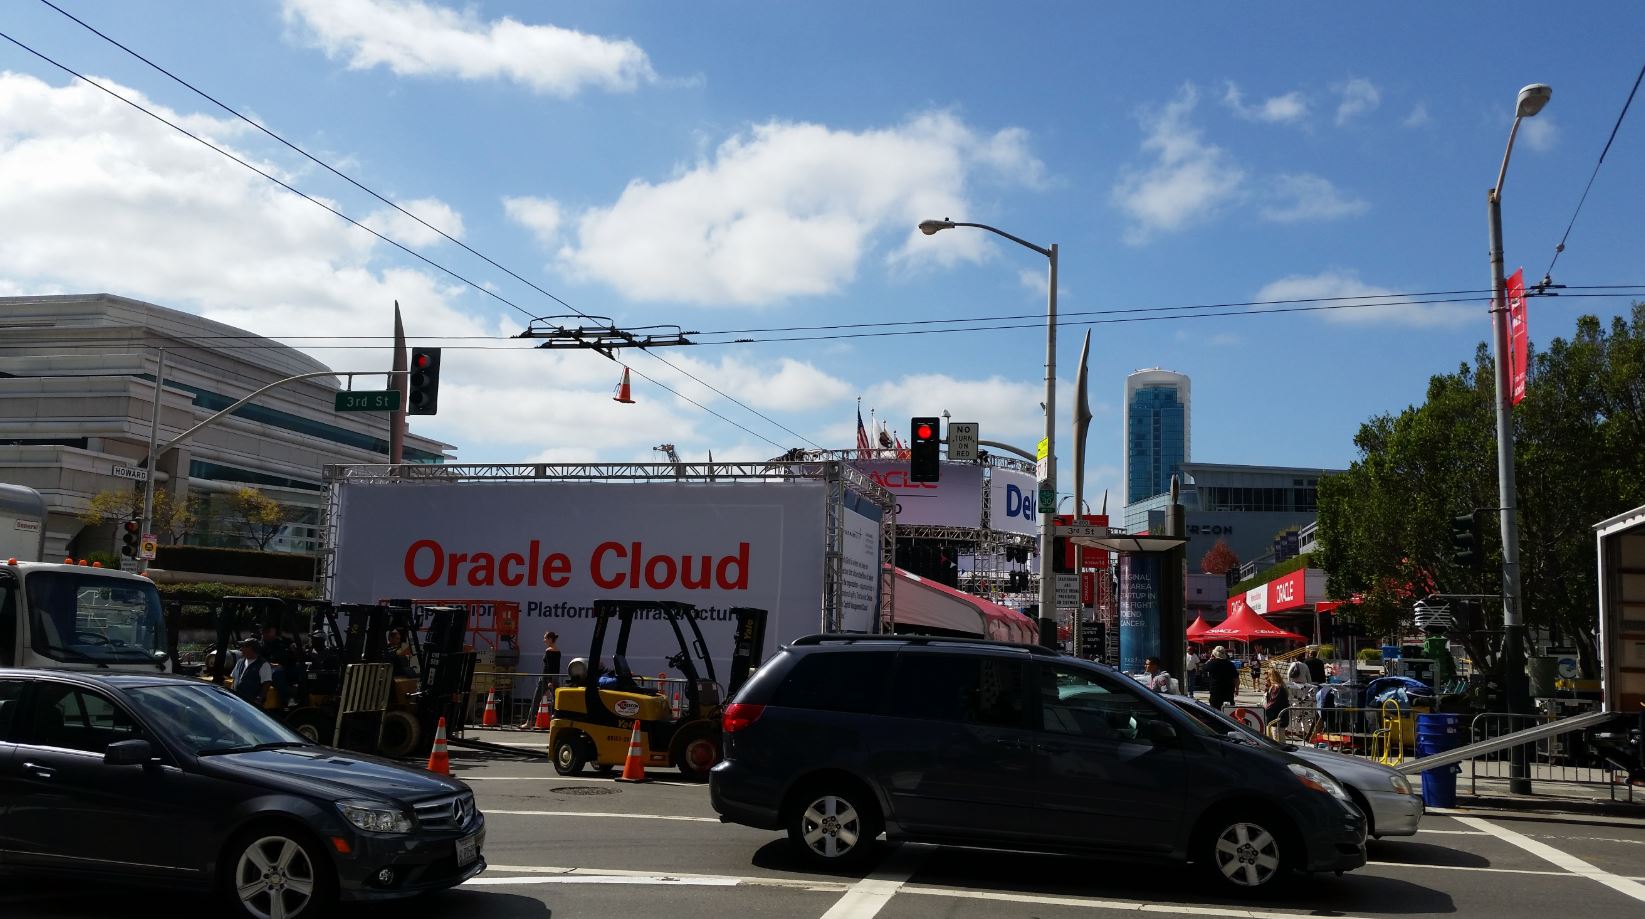 2014 Oracle OpenWorld with Oracle Cloud logo.